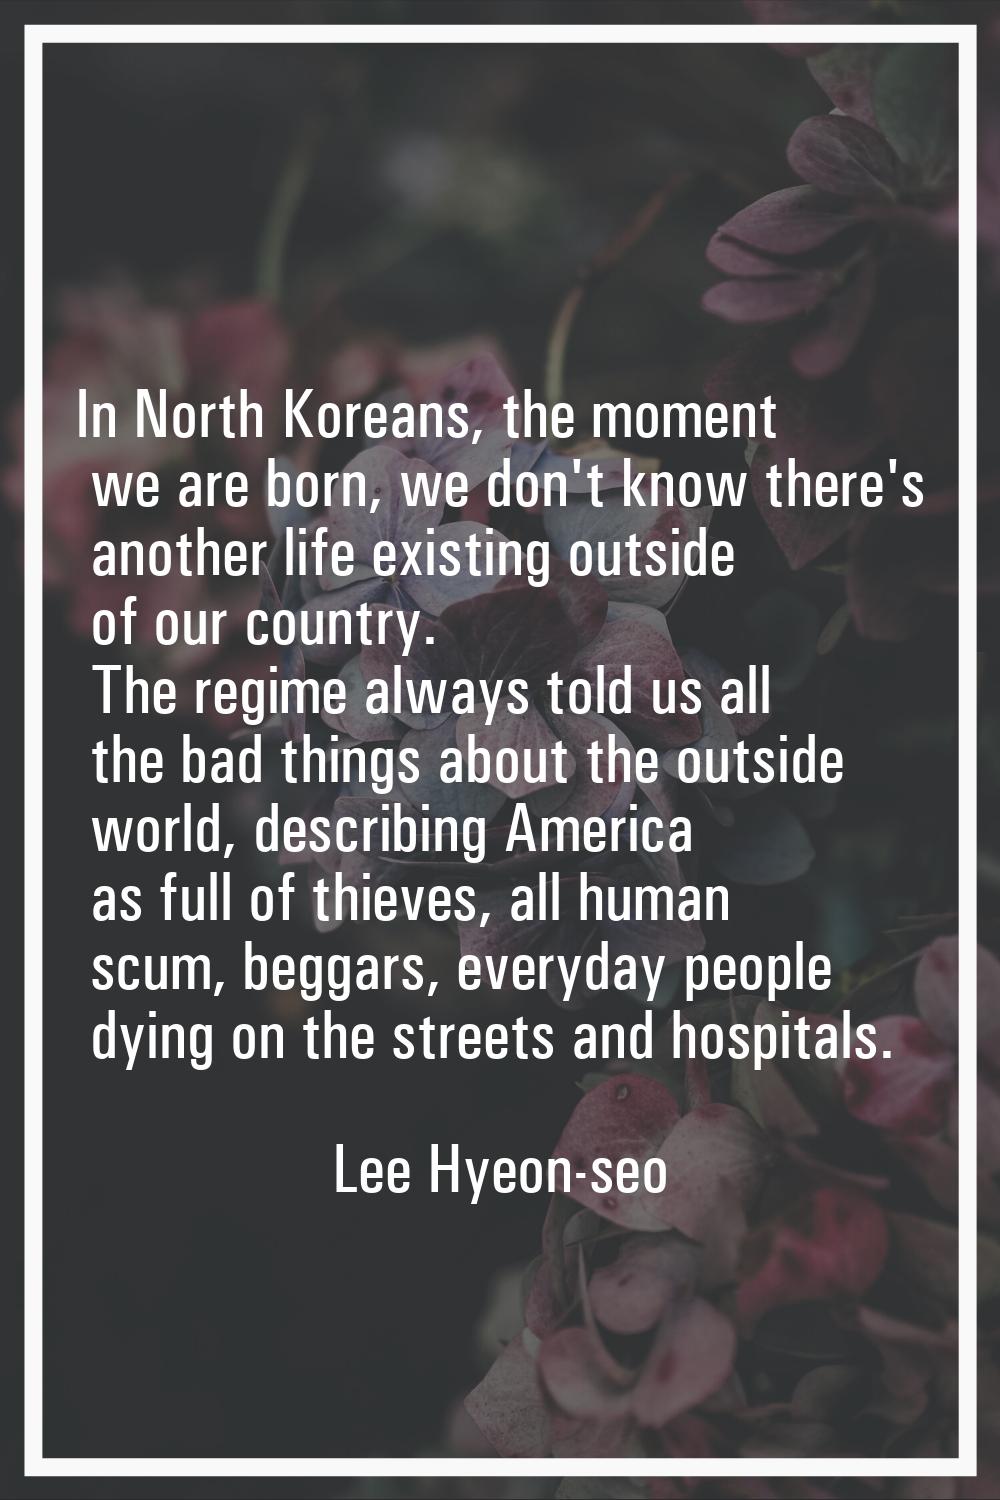 In North Koreans, the moment we are born, we don't know there's another life existing outside of ou